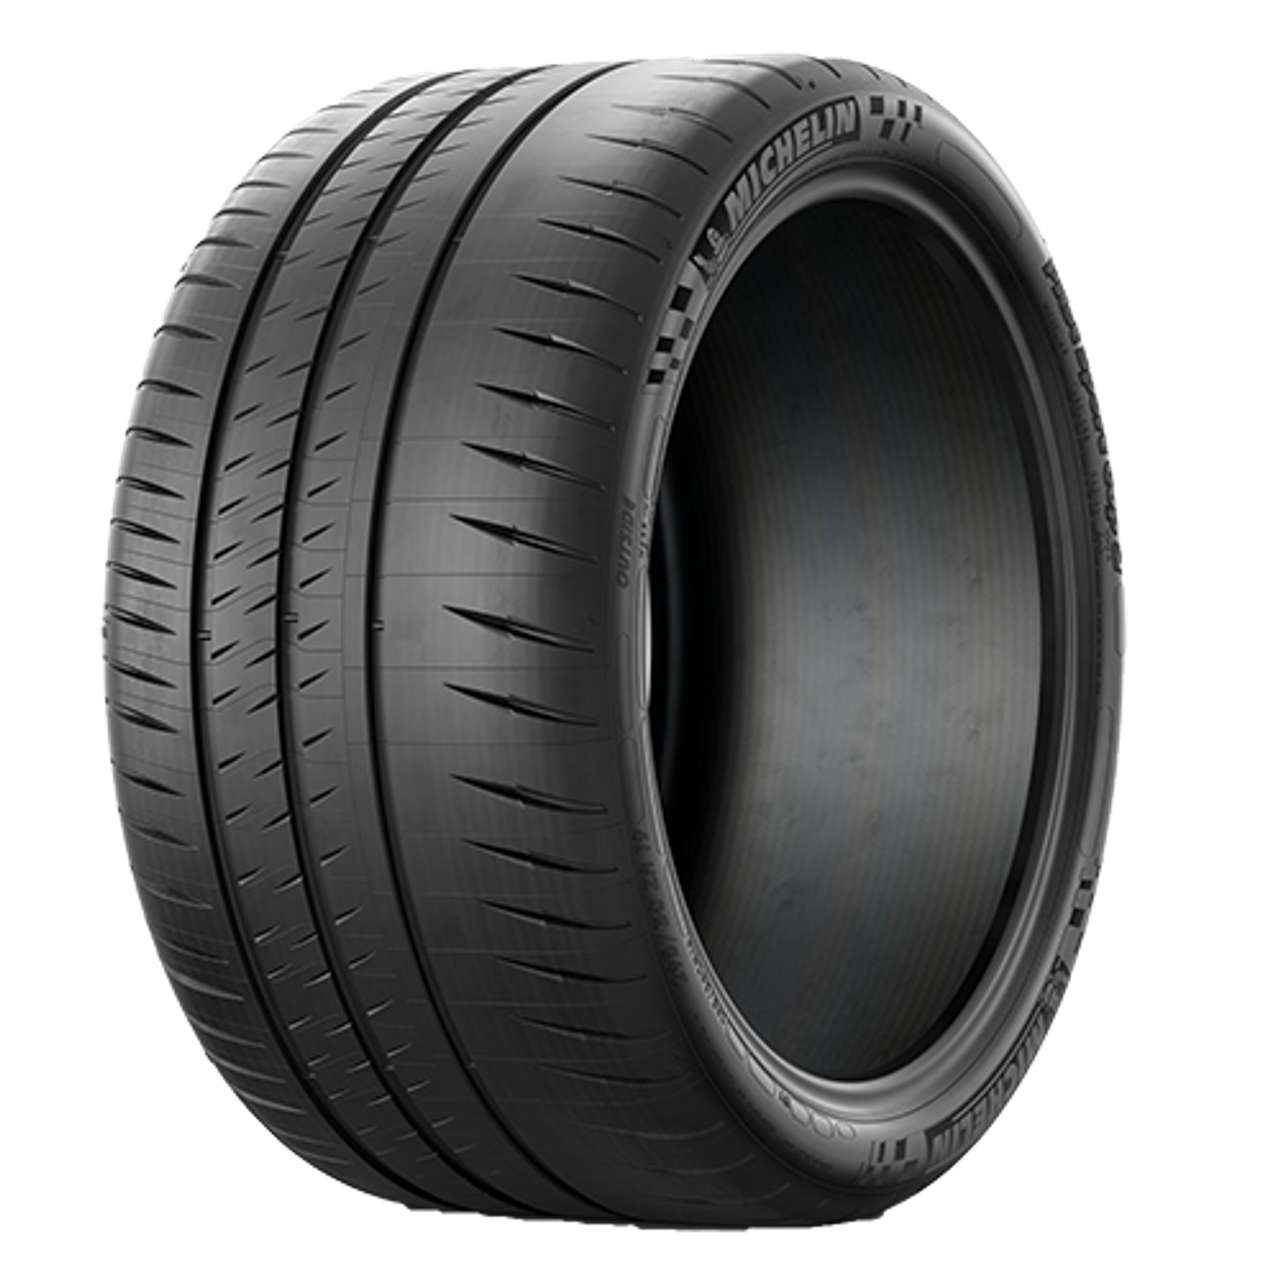 MICHELIN PILOT SPORT CUP 2 CONNECT (N0) 335/30ZR21 109(Y) BSW